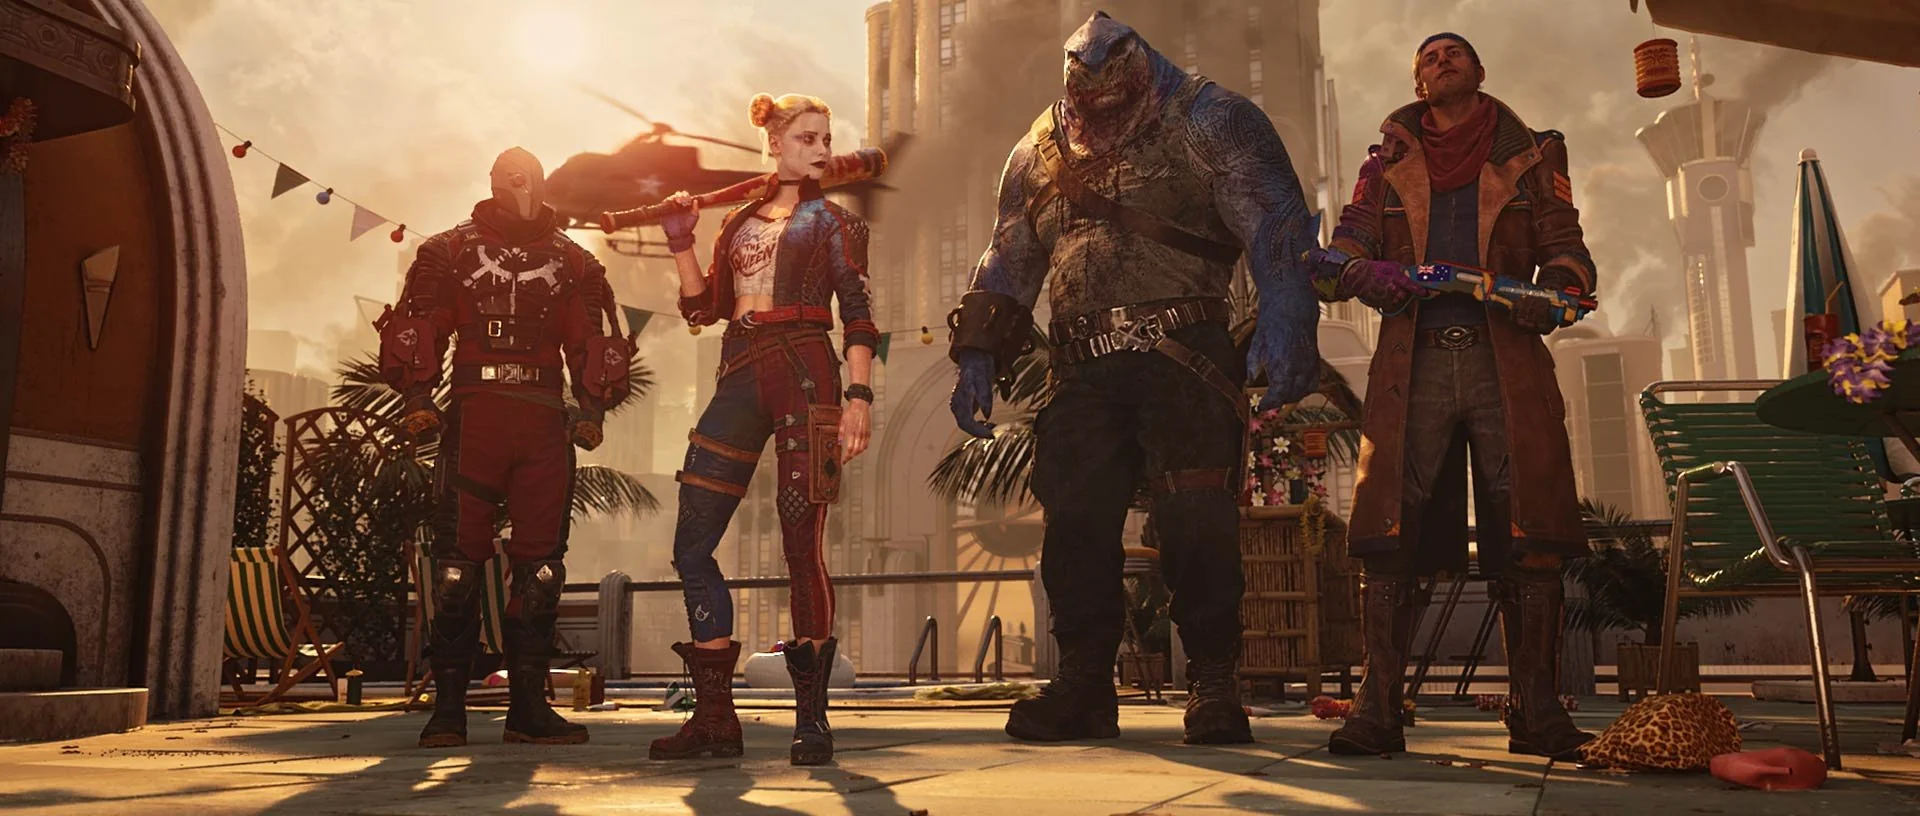 Rocksteady Provides In-Game Currency to Deluxe Edition Players of Suicide Squad Following Temporary Game Shutdown